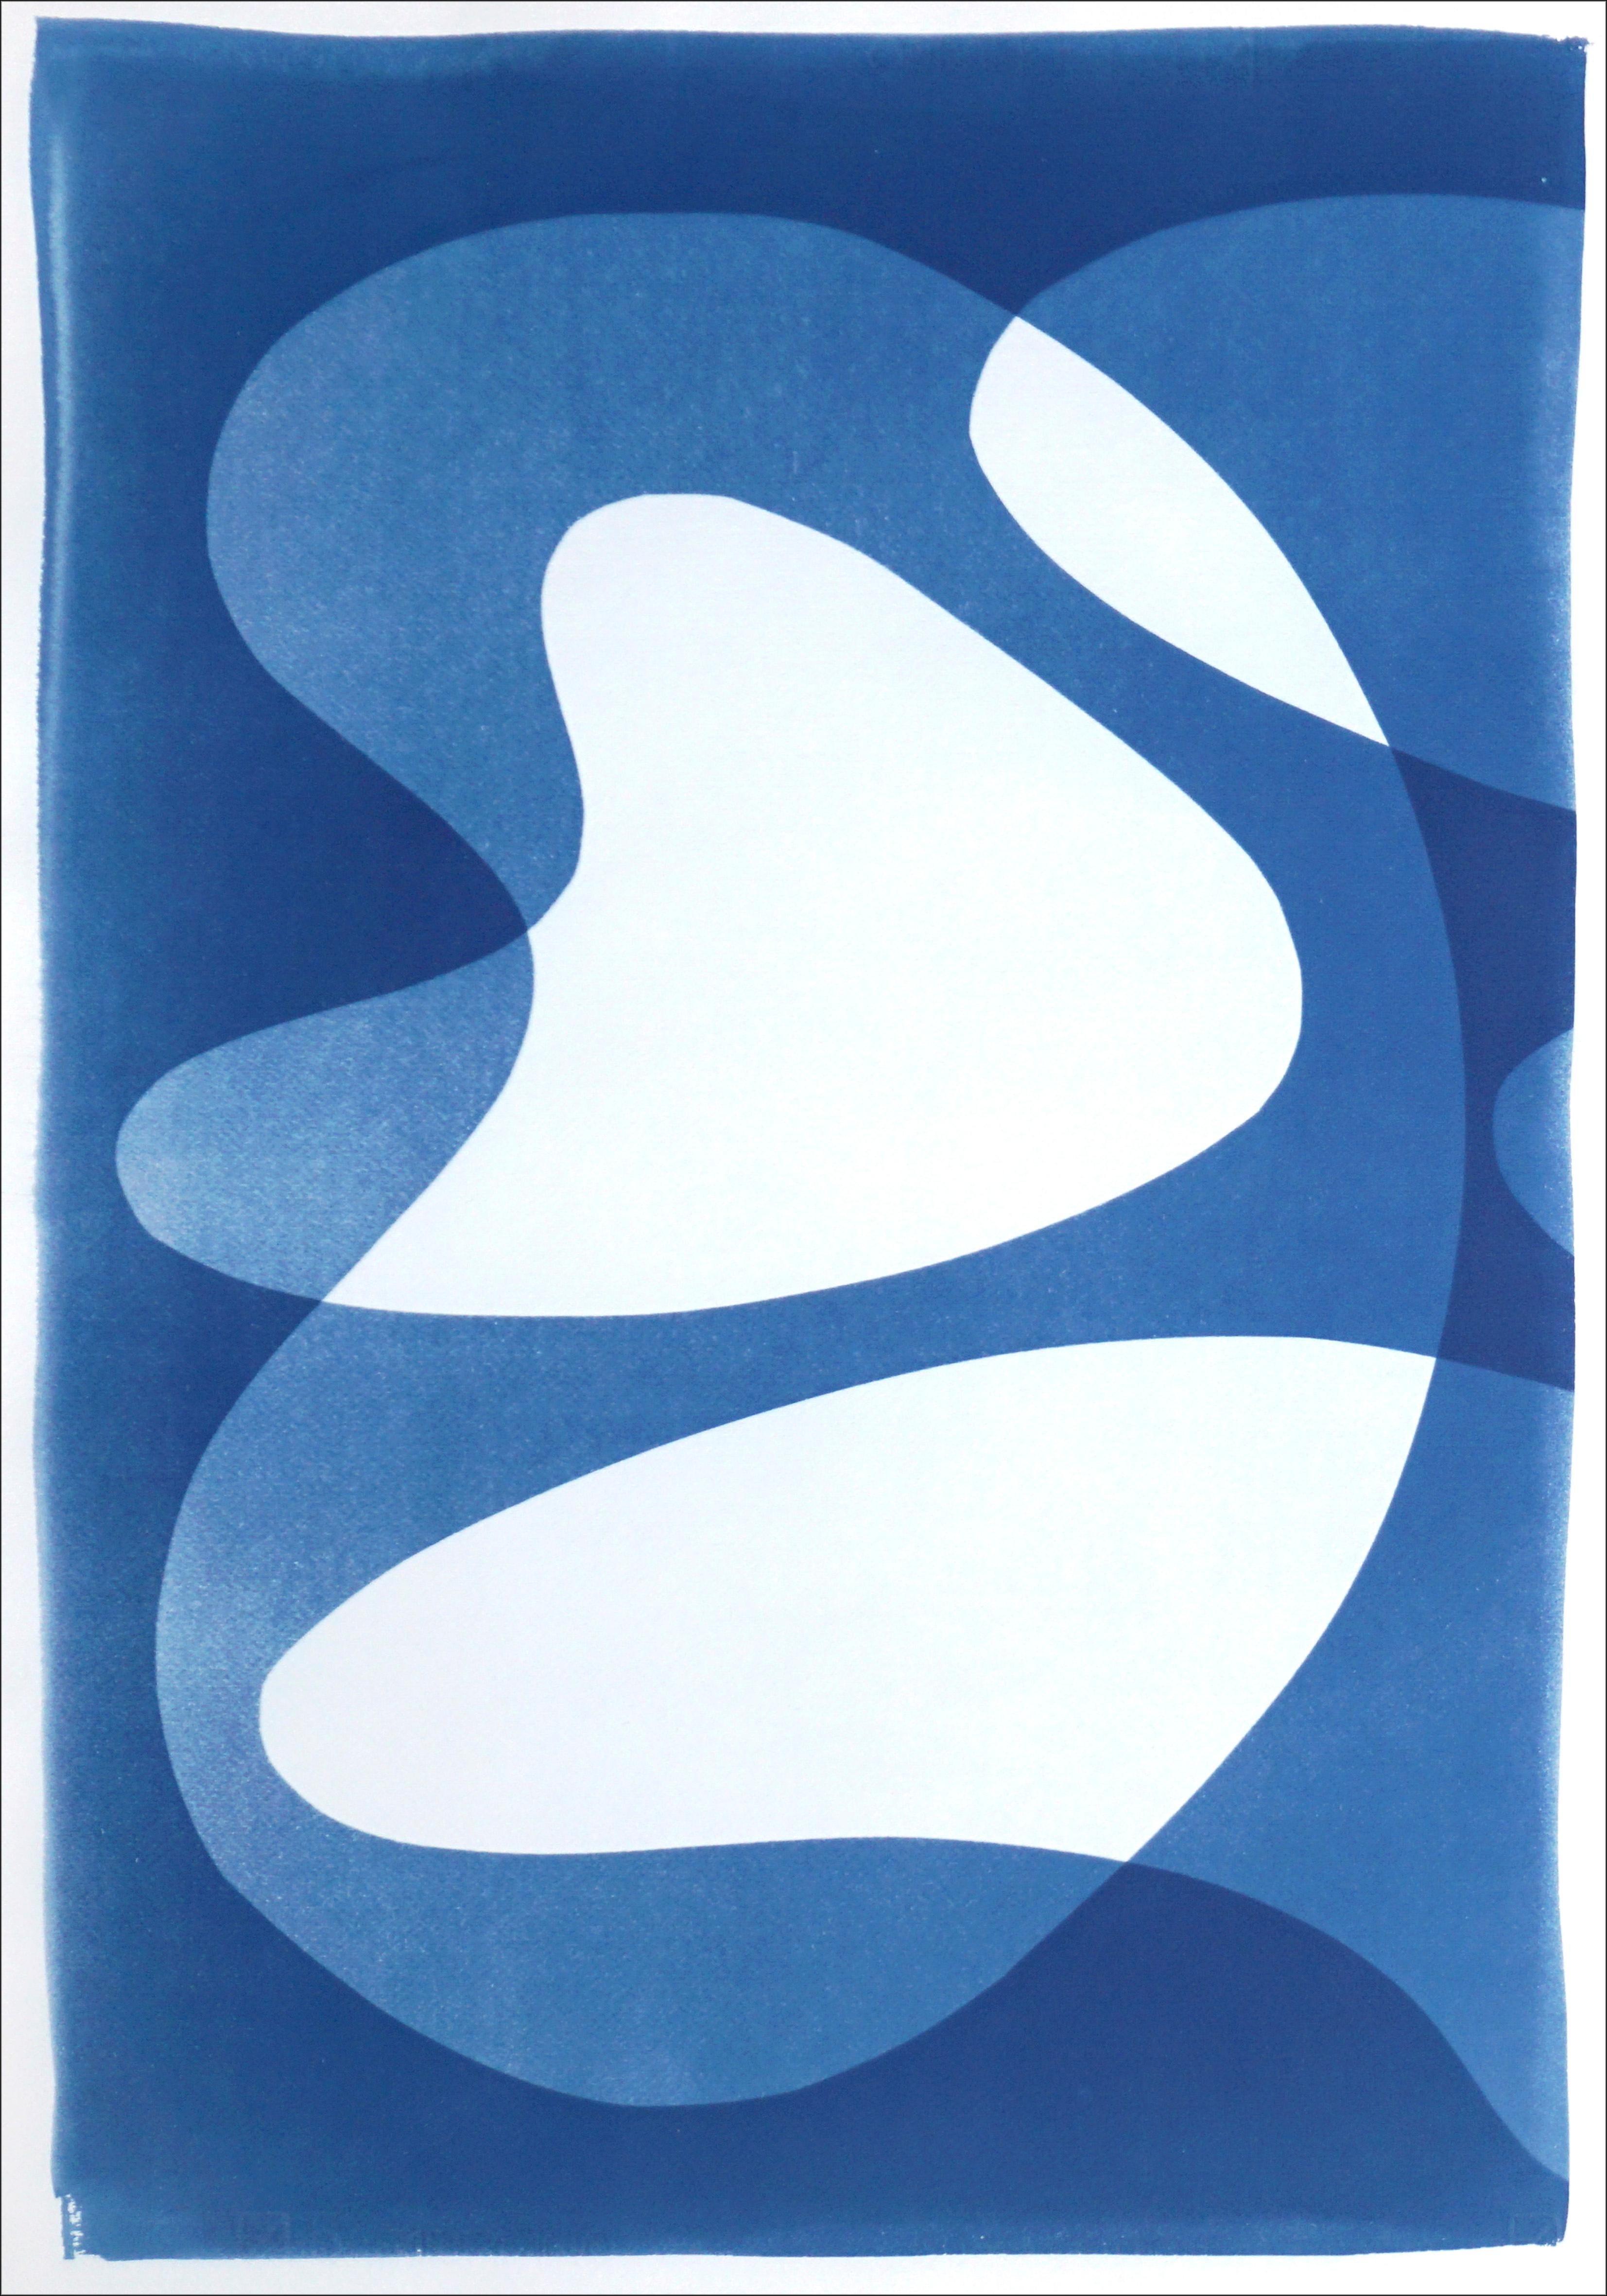 Futurist Pool Diptych, Mid-Century Shapes, Blue Tones Transparencies Cyanotype - Modern Print by Kind of Cyan